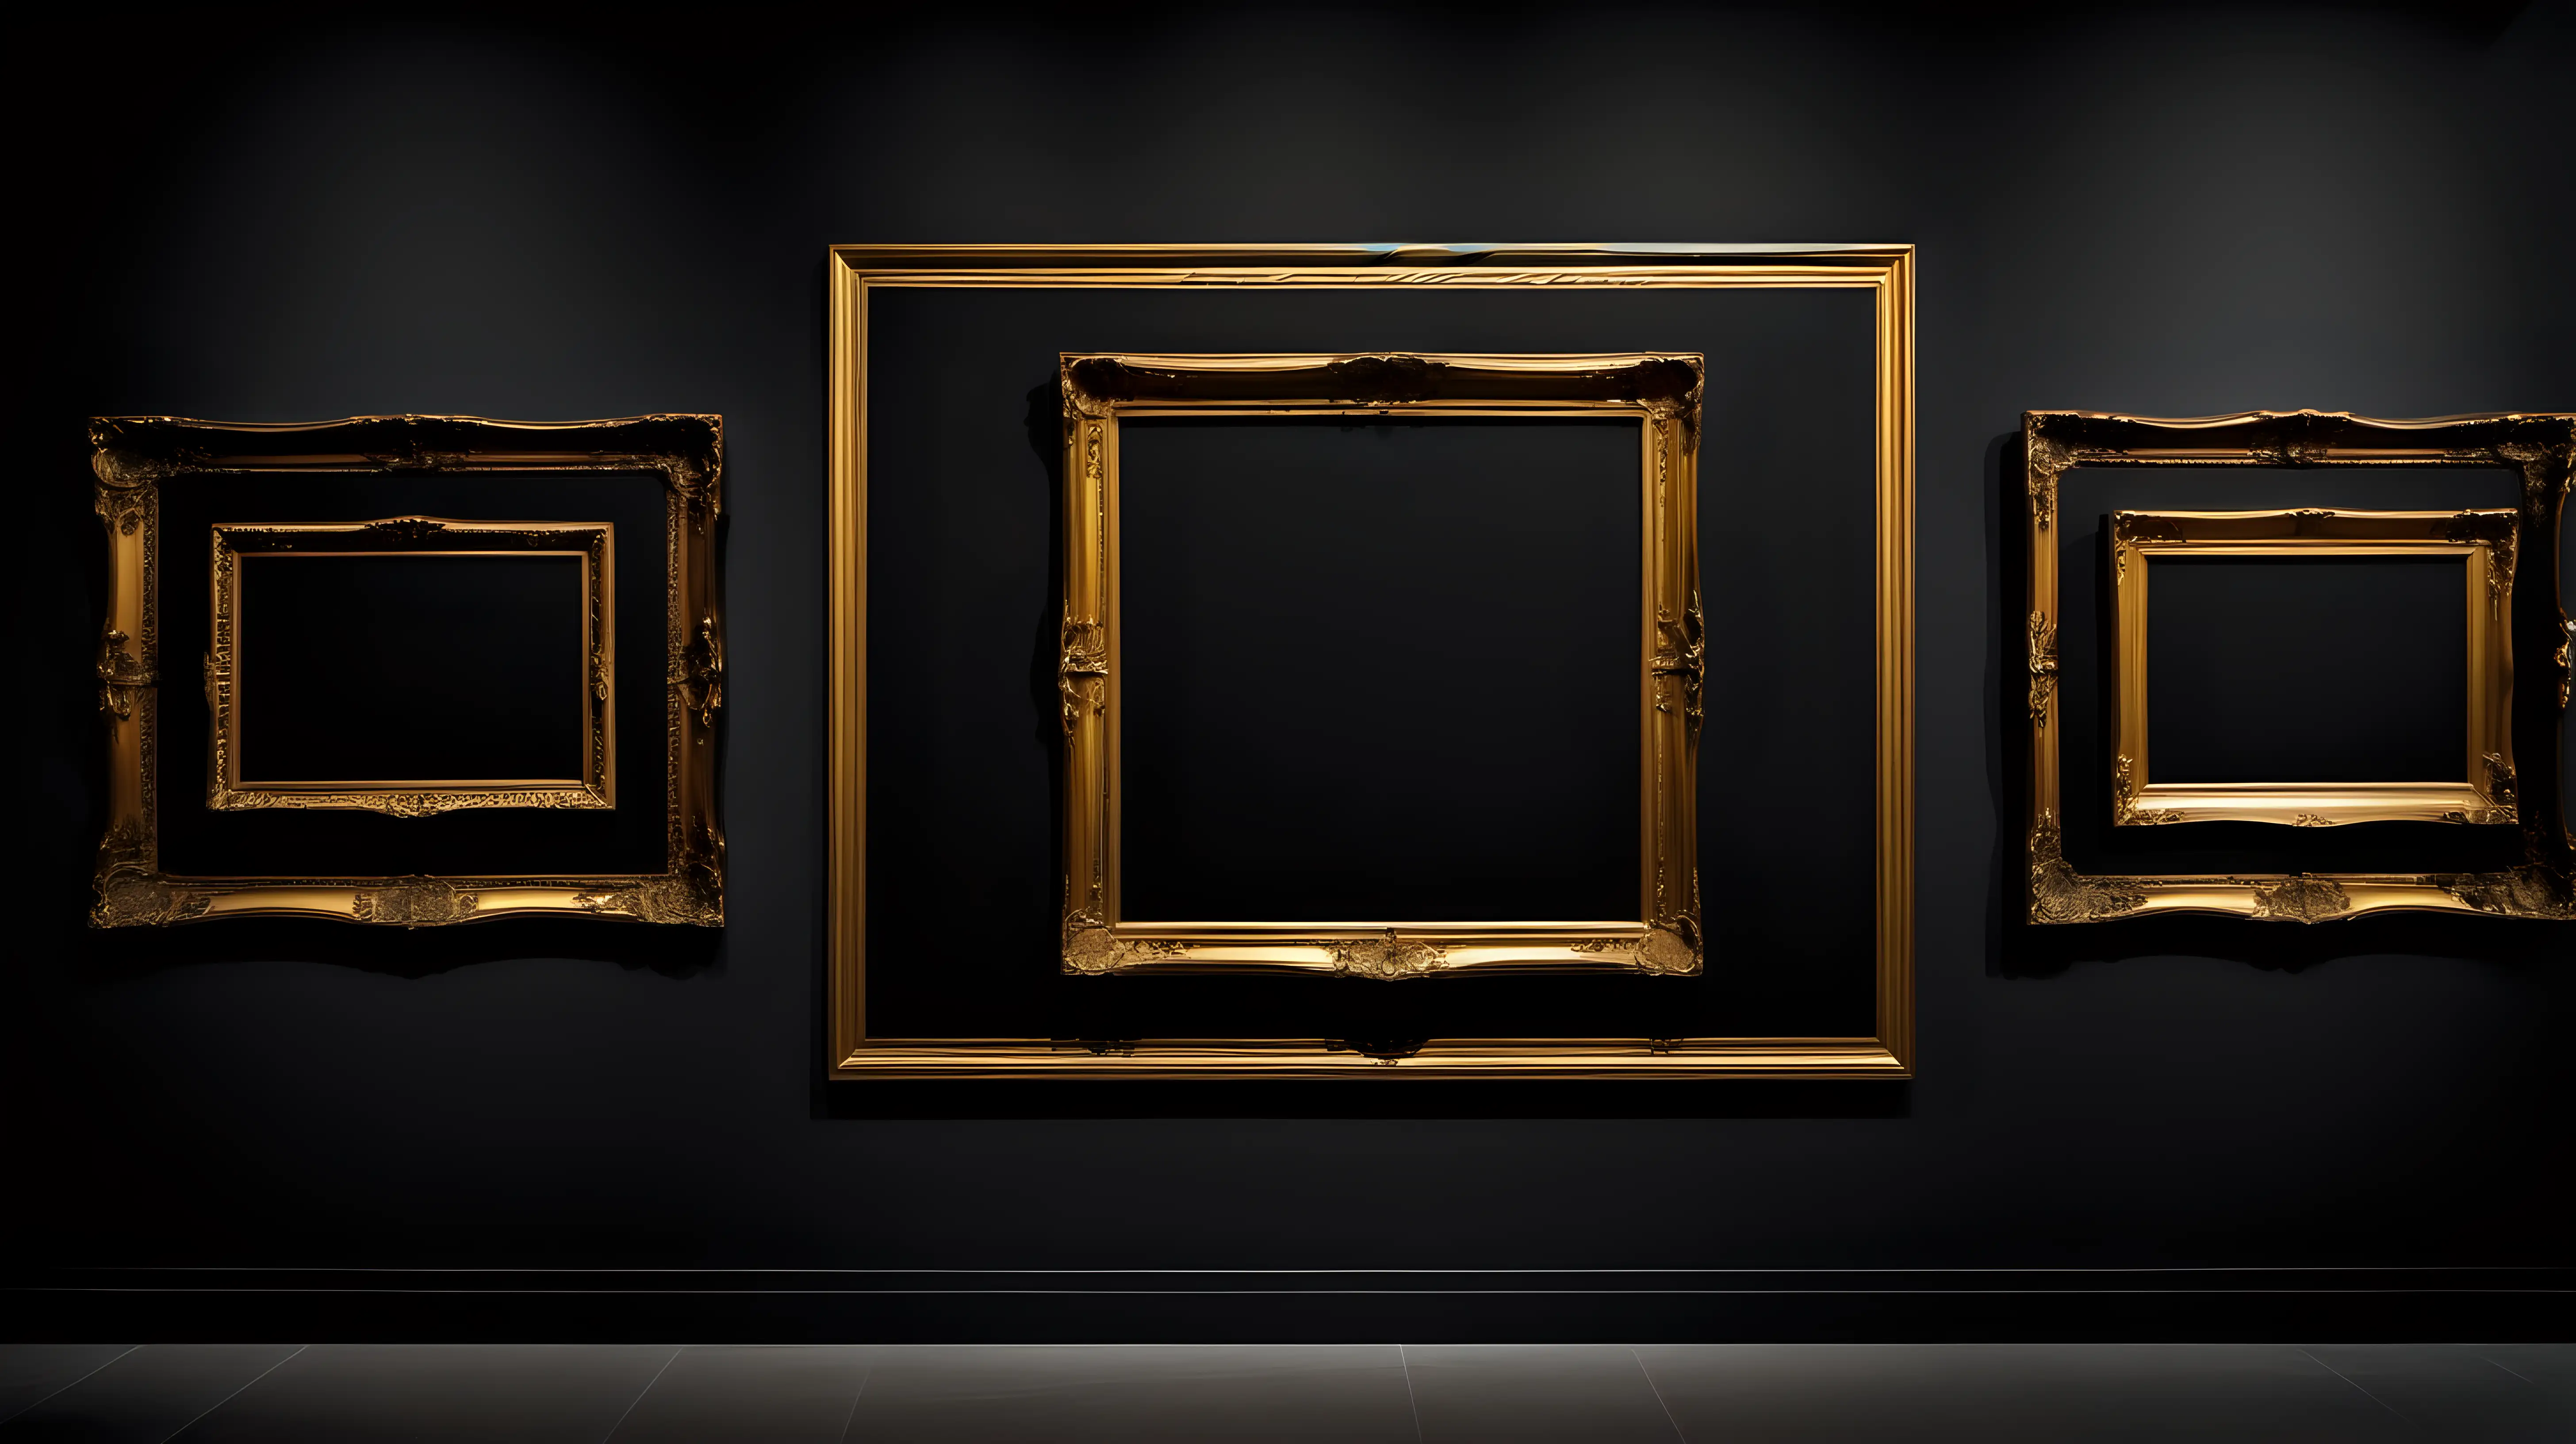 Dark Art Museum Wall with Three Solid Black Paintings in Gold Frames ...